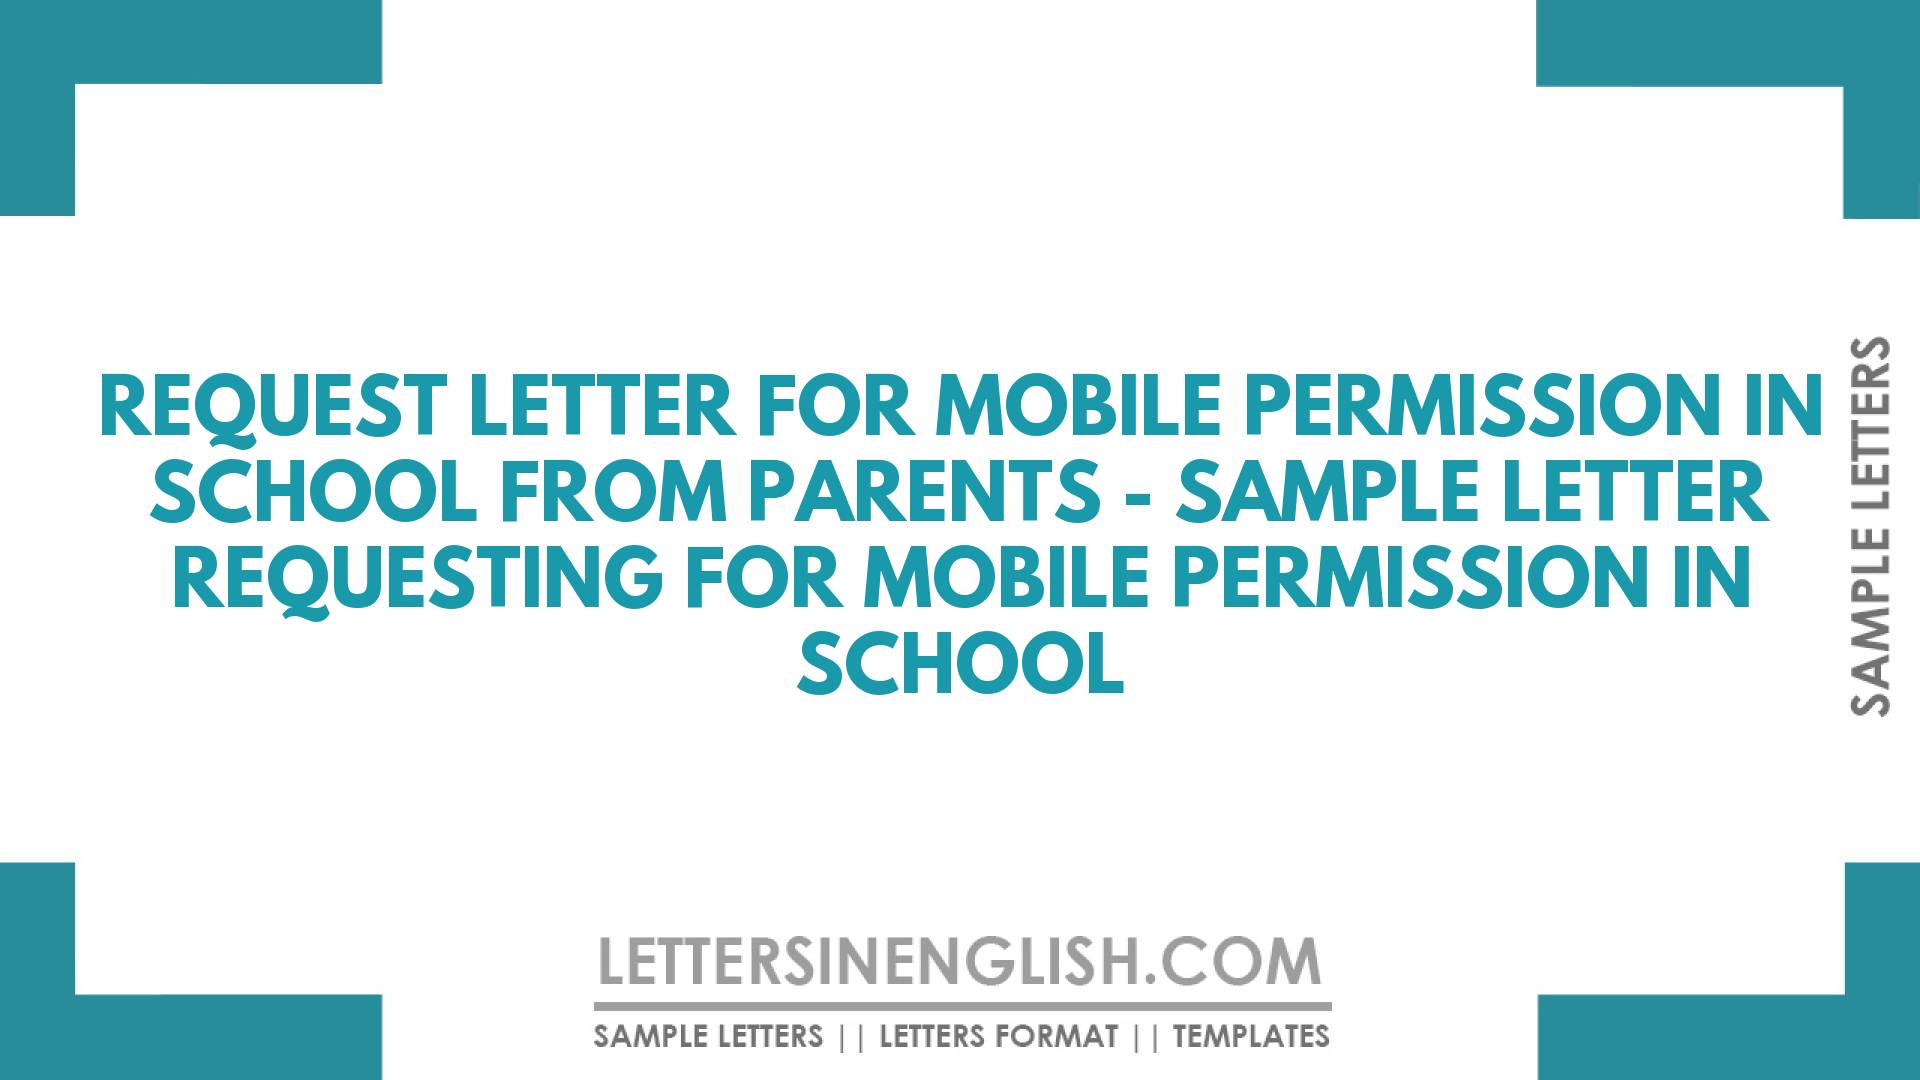 Request Letter for Mobile Permission in School from Parents – Sample Letter Requesting for Mobile Permission in School